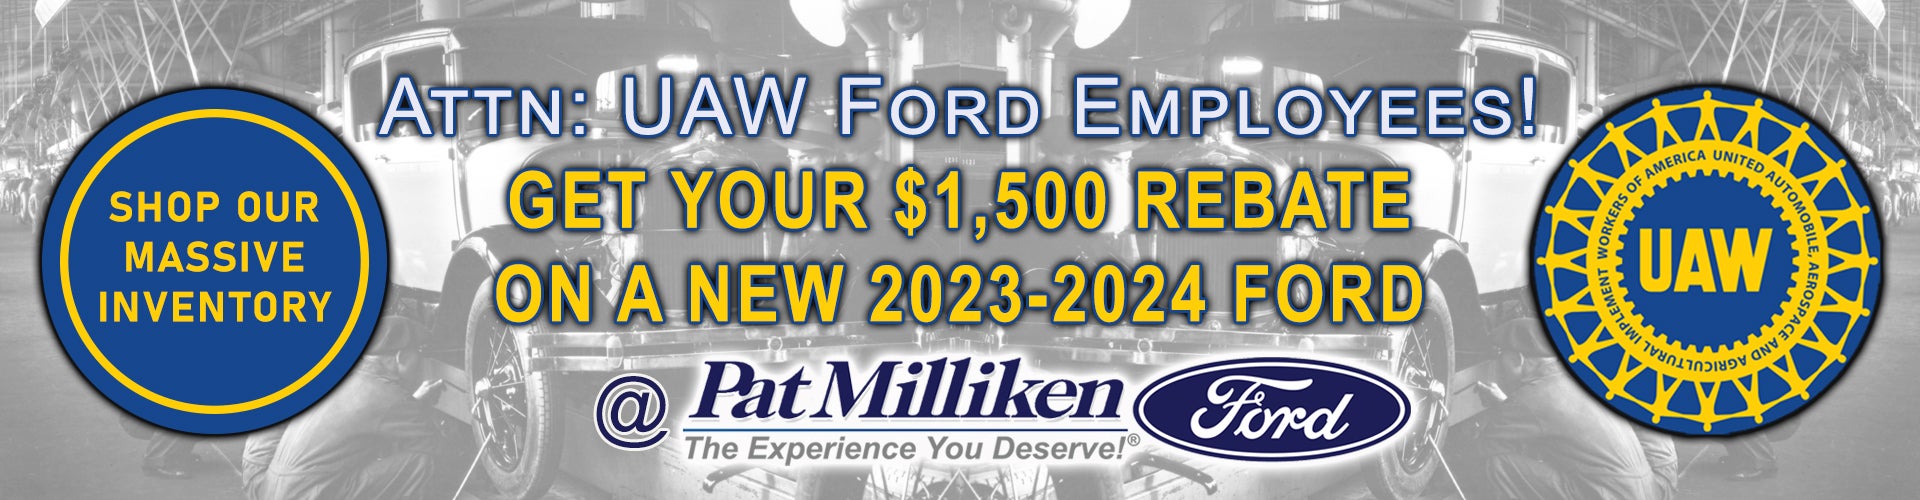 UAW Ford Employees Save More At Pat Milliken Ford